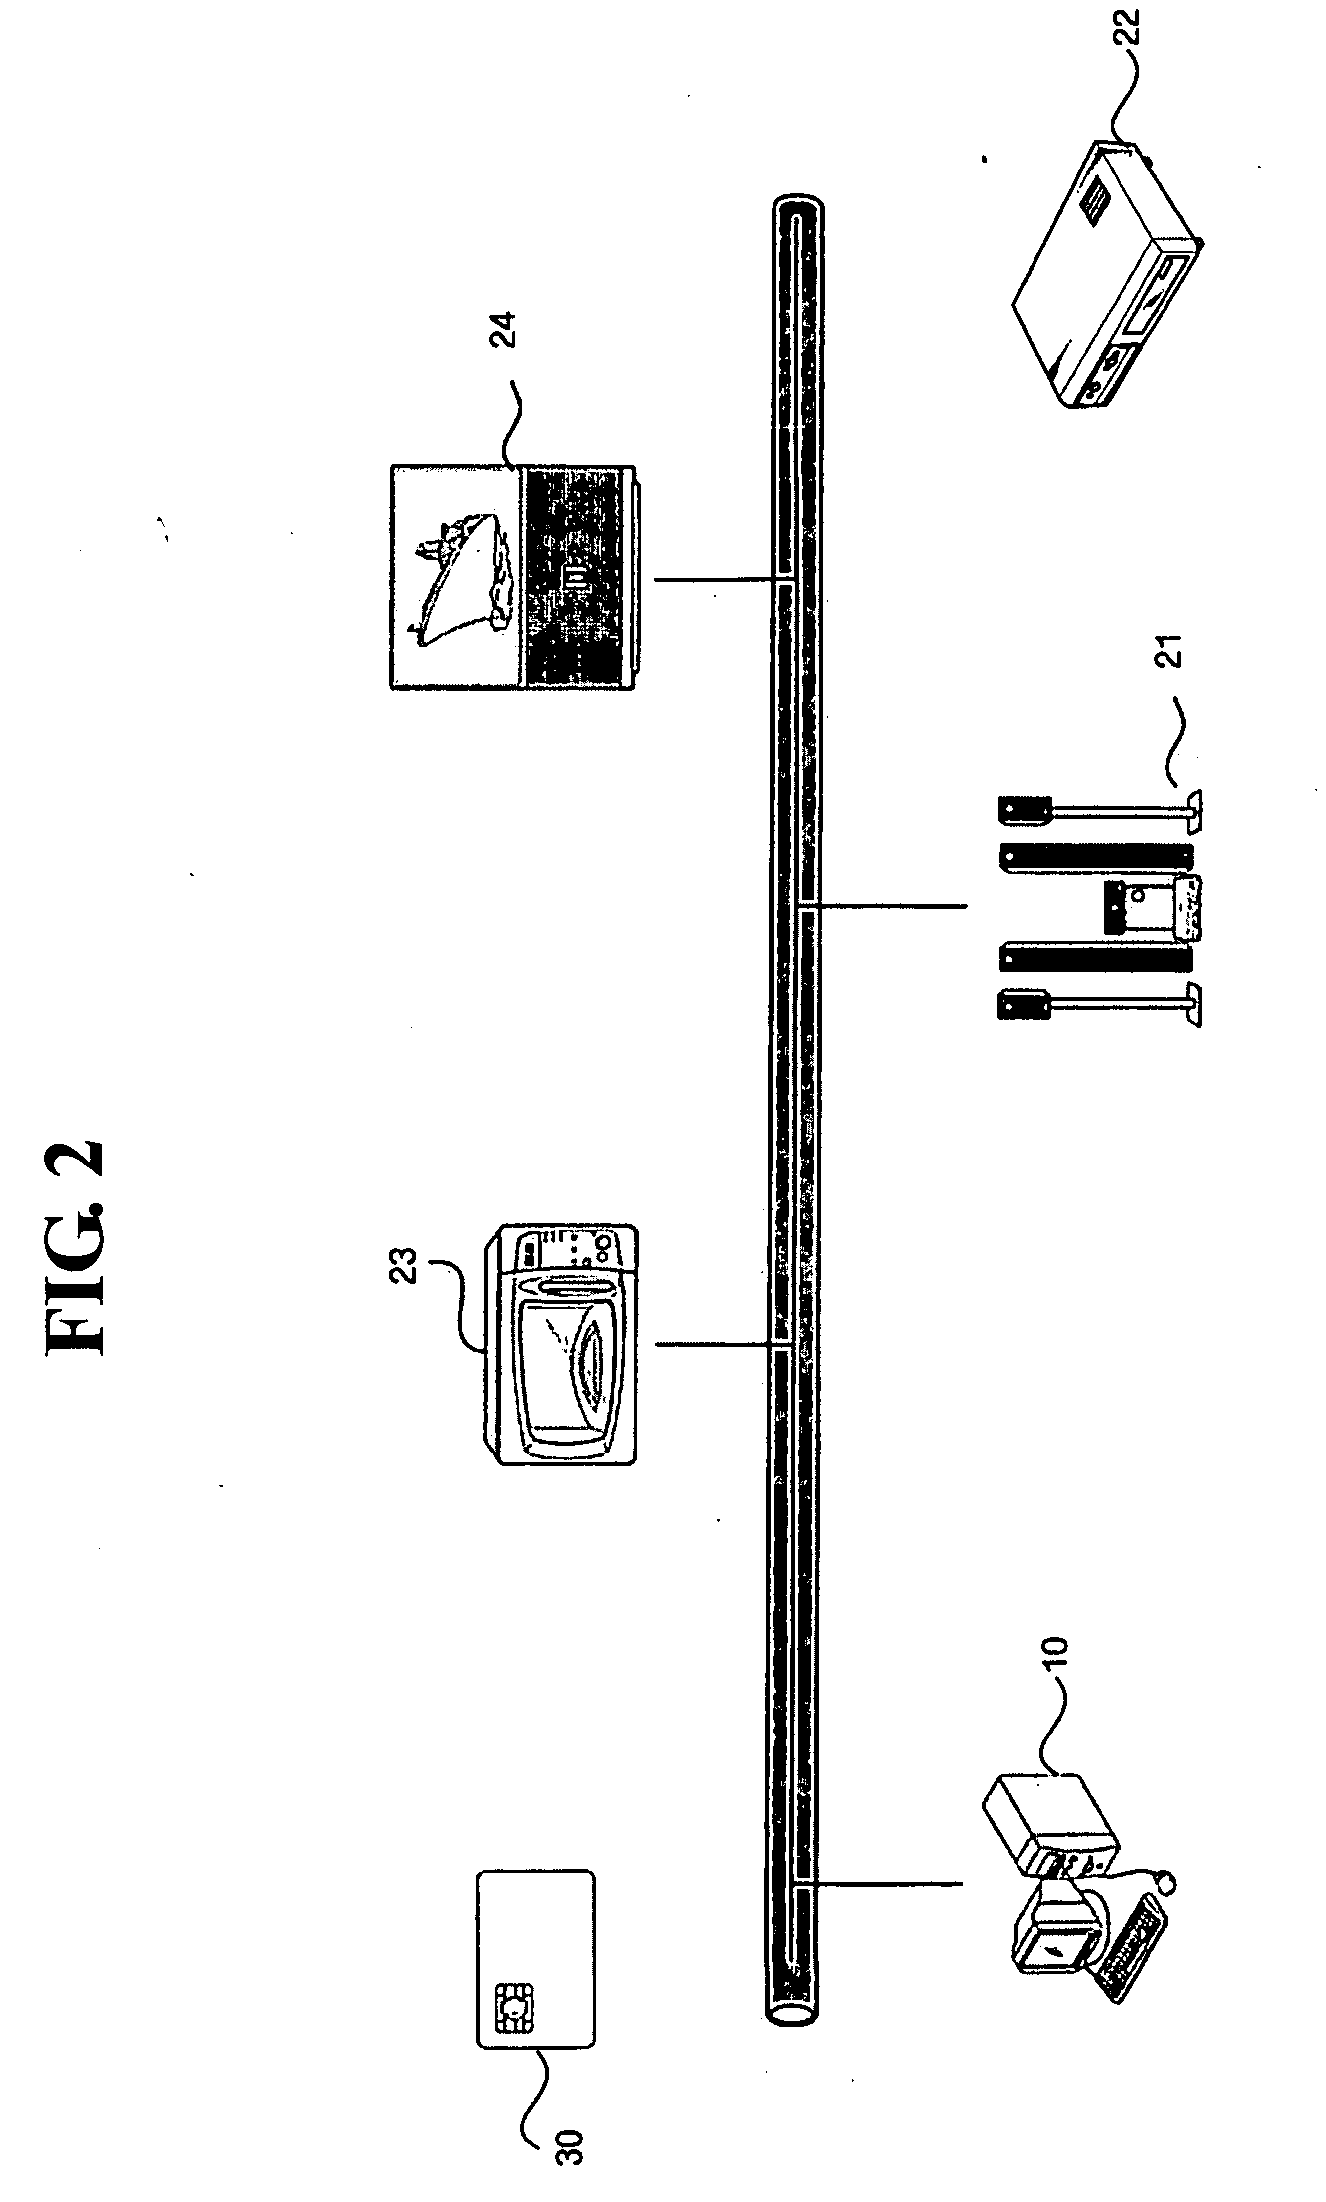 Apparatus and method for executing security function using smart card